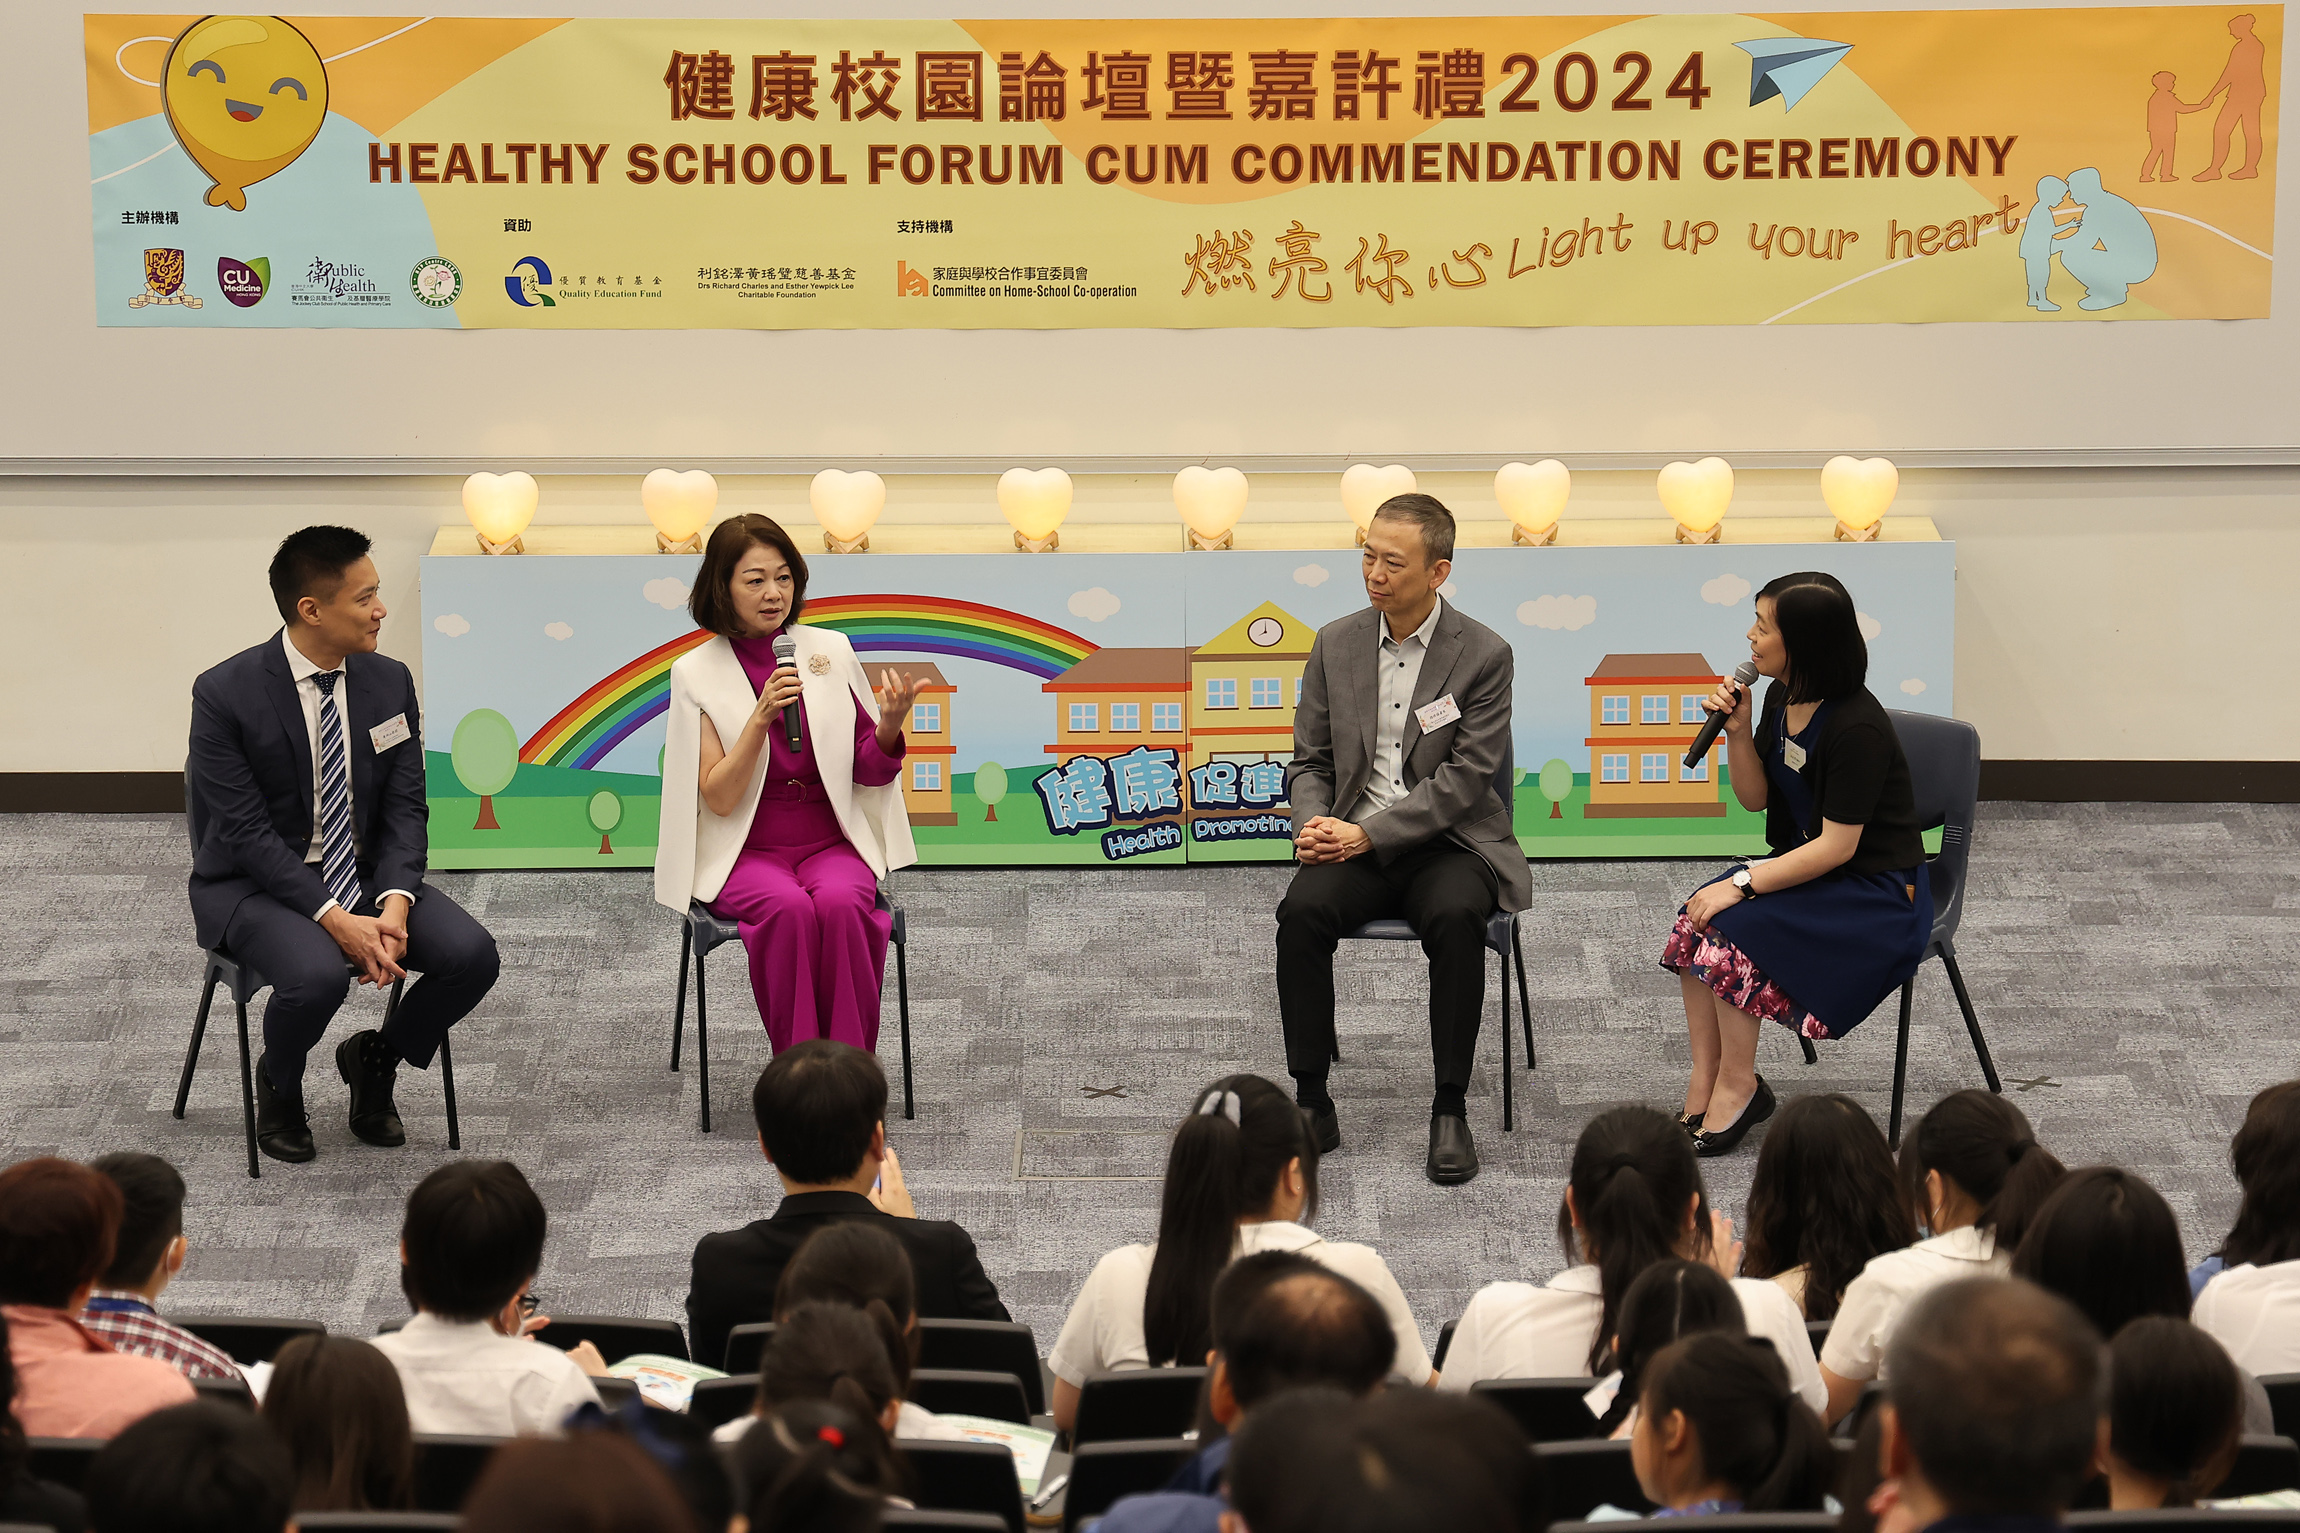 (From left) Professor Samuel Wong, Ms Scarlett Pong, and Dr Thomas Chung exchanged views on mental health issues of school children. The topics included common mental health problems and health promotion in schools.